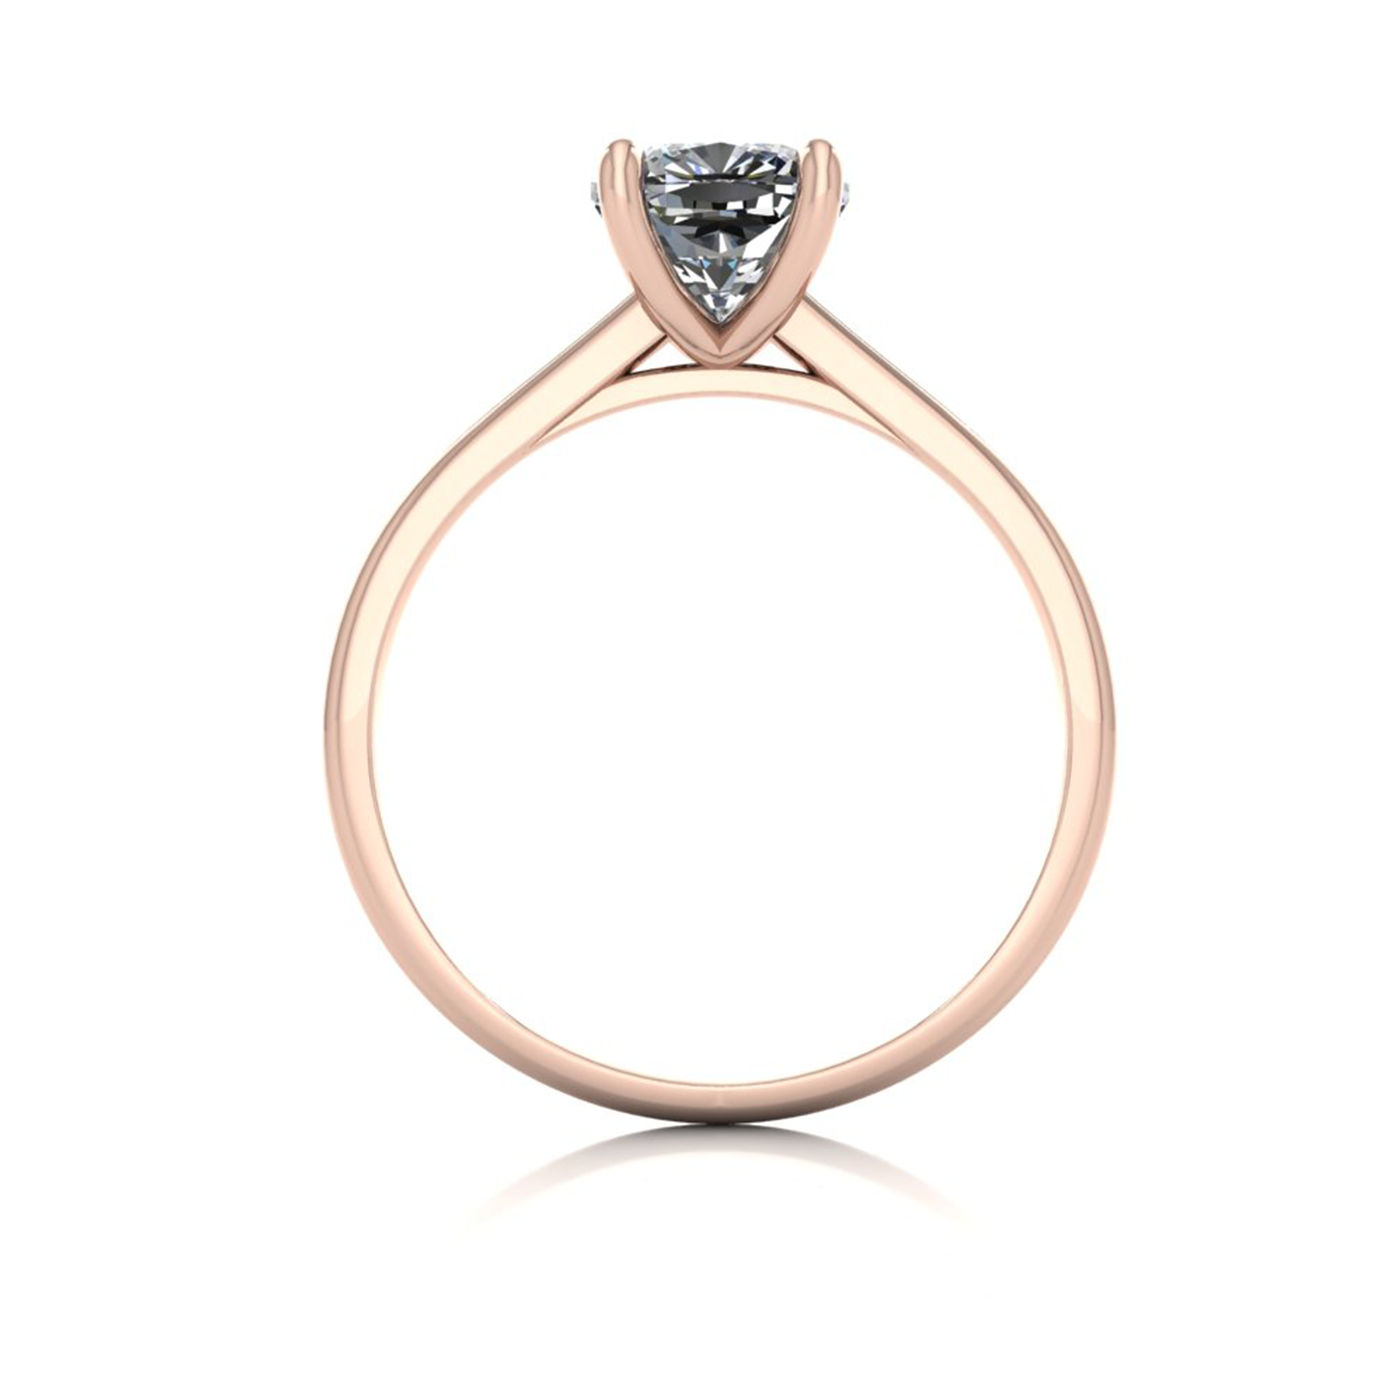 18k rose gold 1.5ct 4 prongs solitaire cushion cut diamond engagement ring with whisper thin band